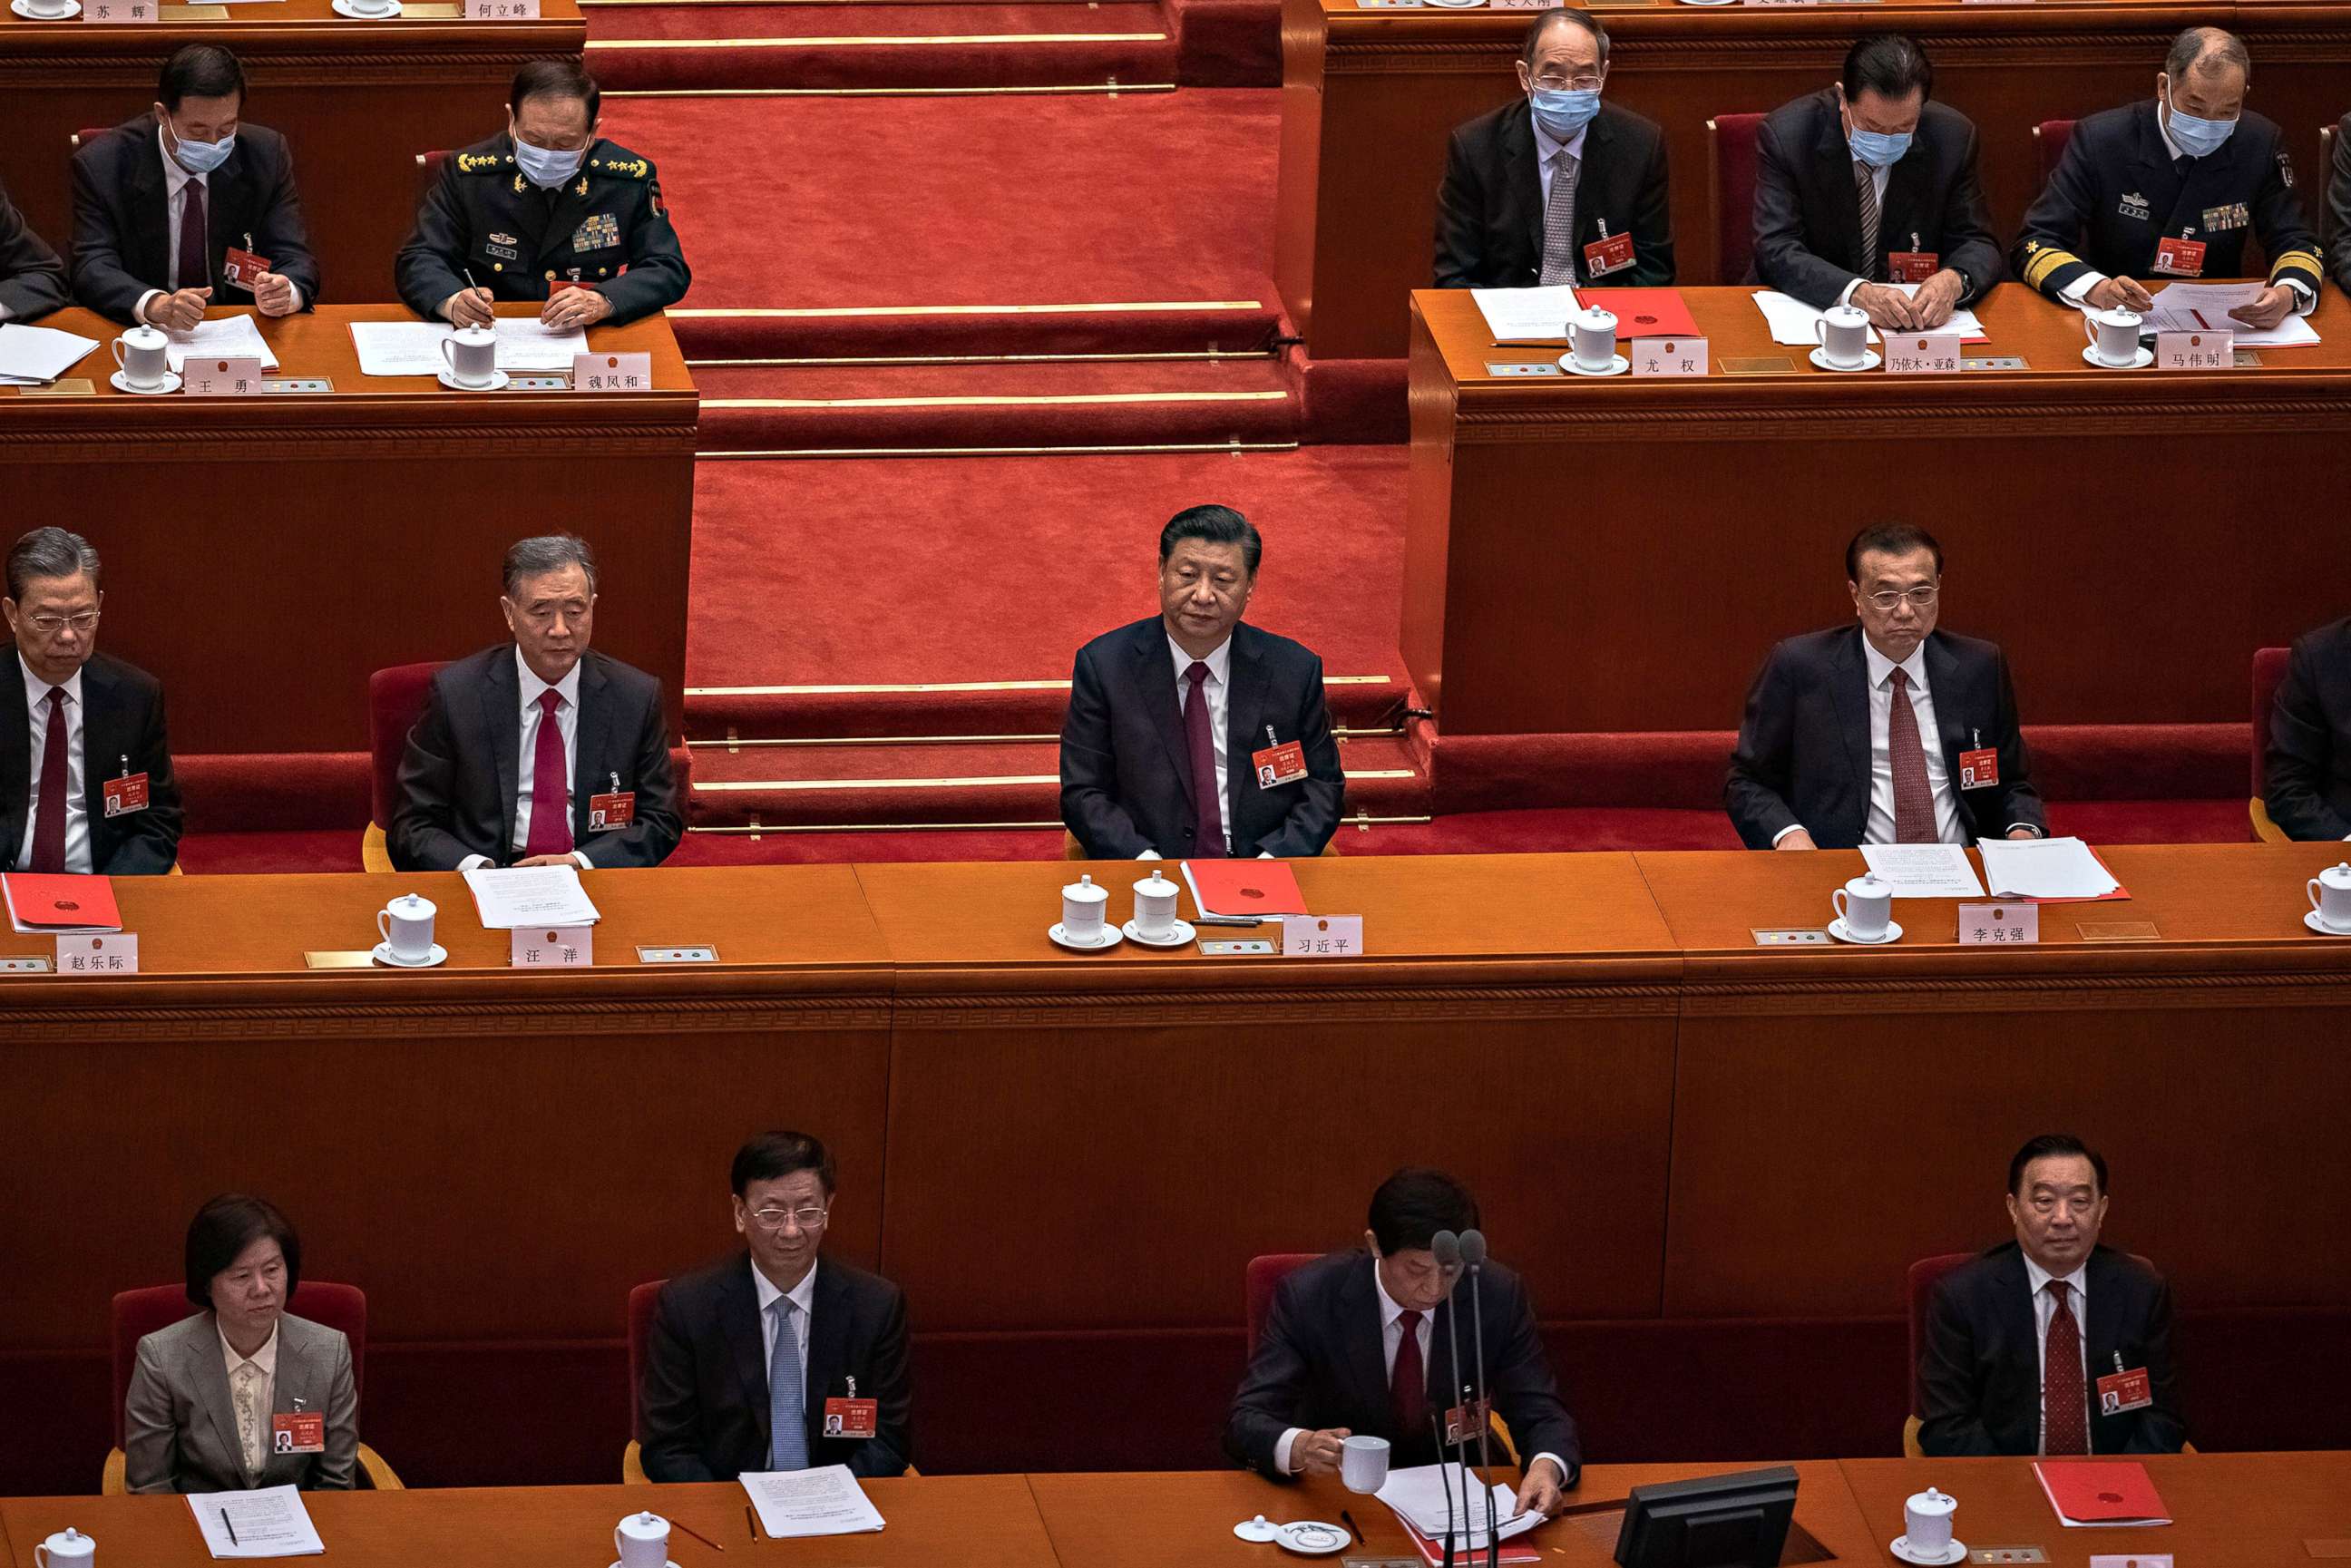 PHOTO: Chinese President Xi Jinping, center, and Premier Li Keqiang, right, sit with other delegates during the closing session of the National People's Congress (NPC), at the Great Hall of the People, in Beijing on  March 11, 2021.